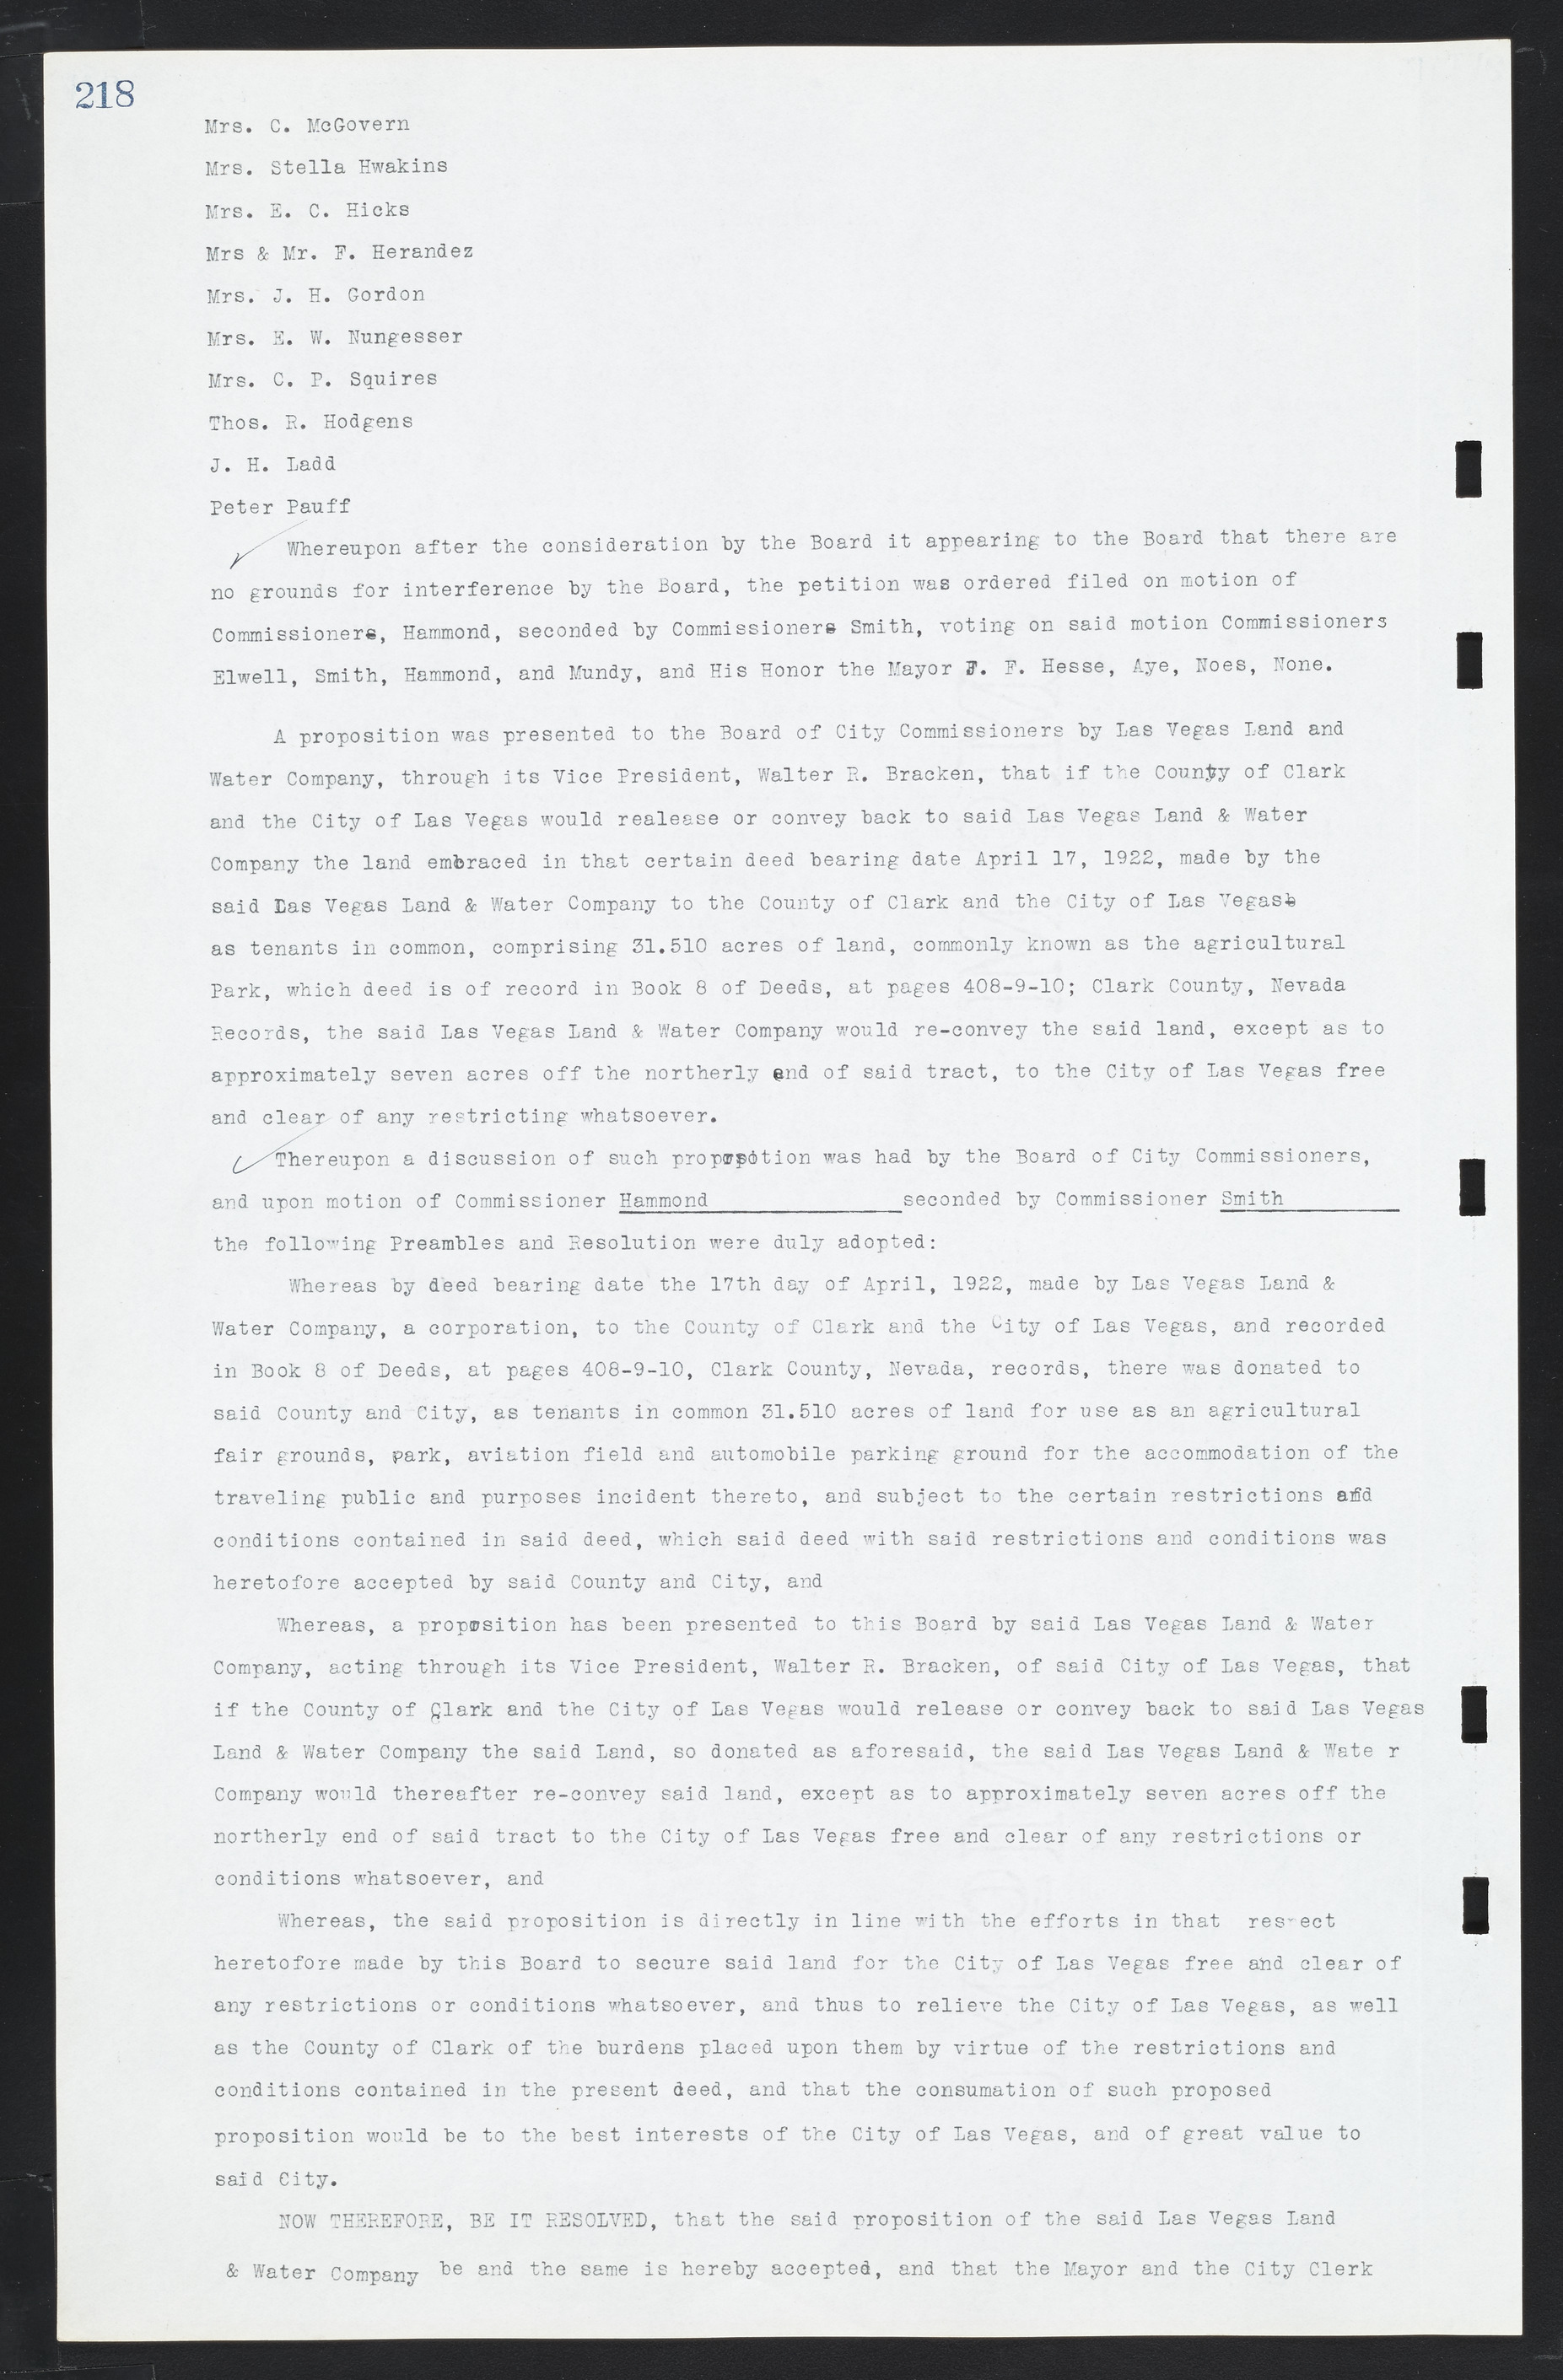 Las Vegas City Commission Minutes, March 1, 1922 to May 10, 1929, lvc000002-225